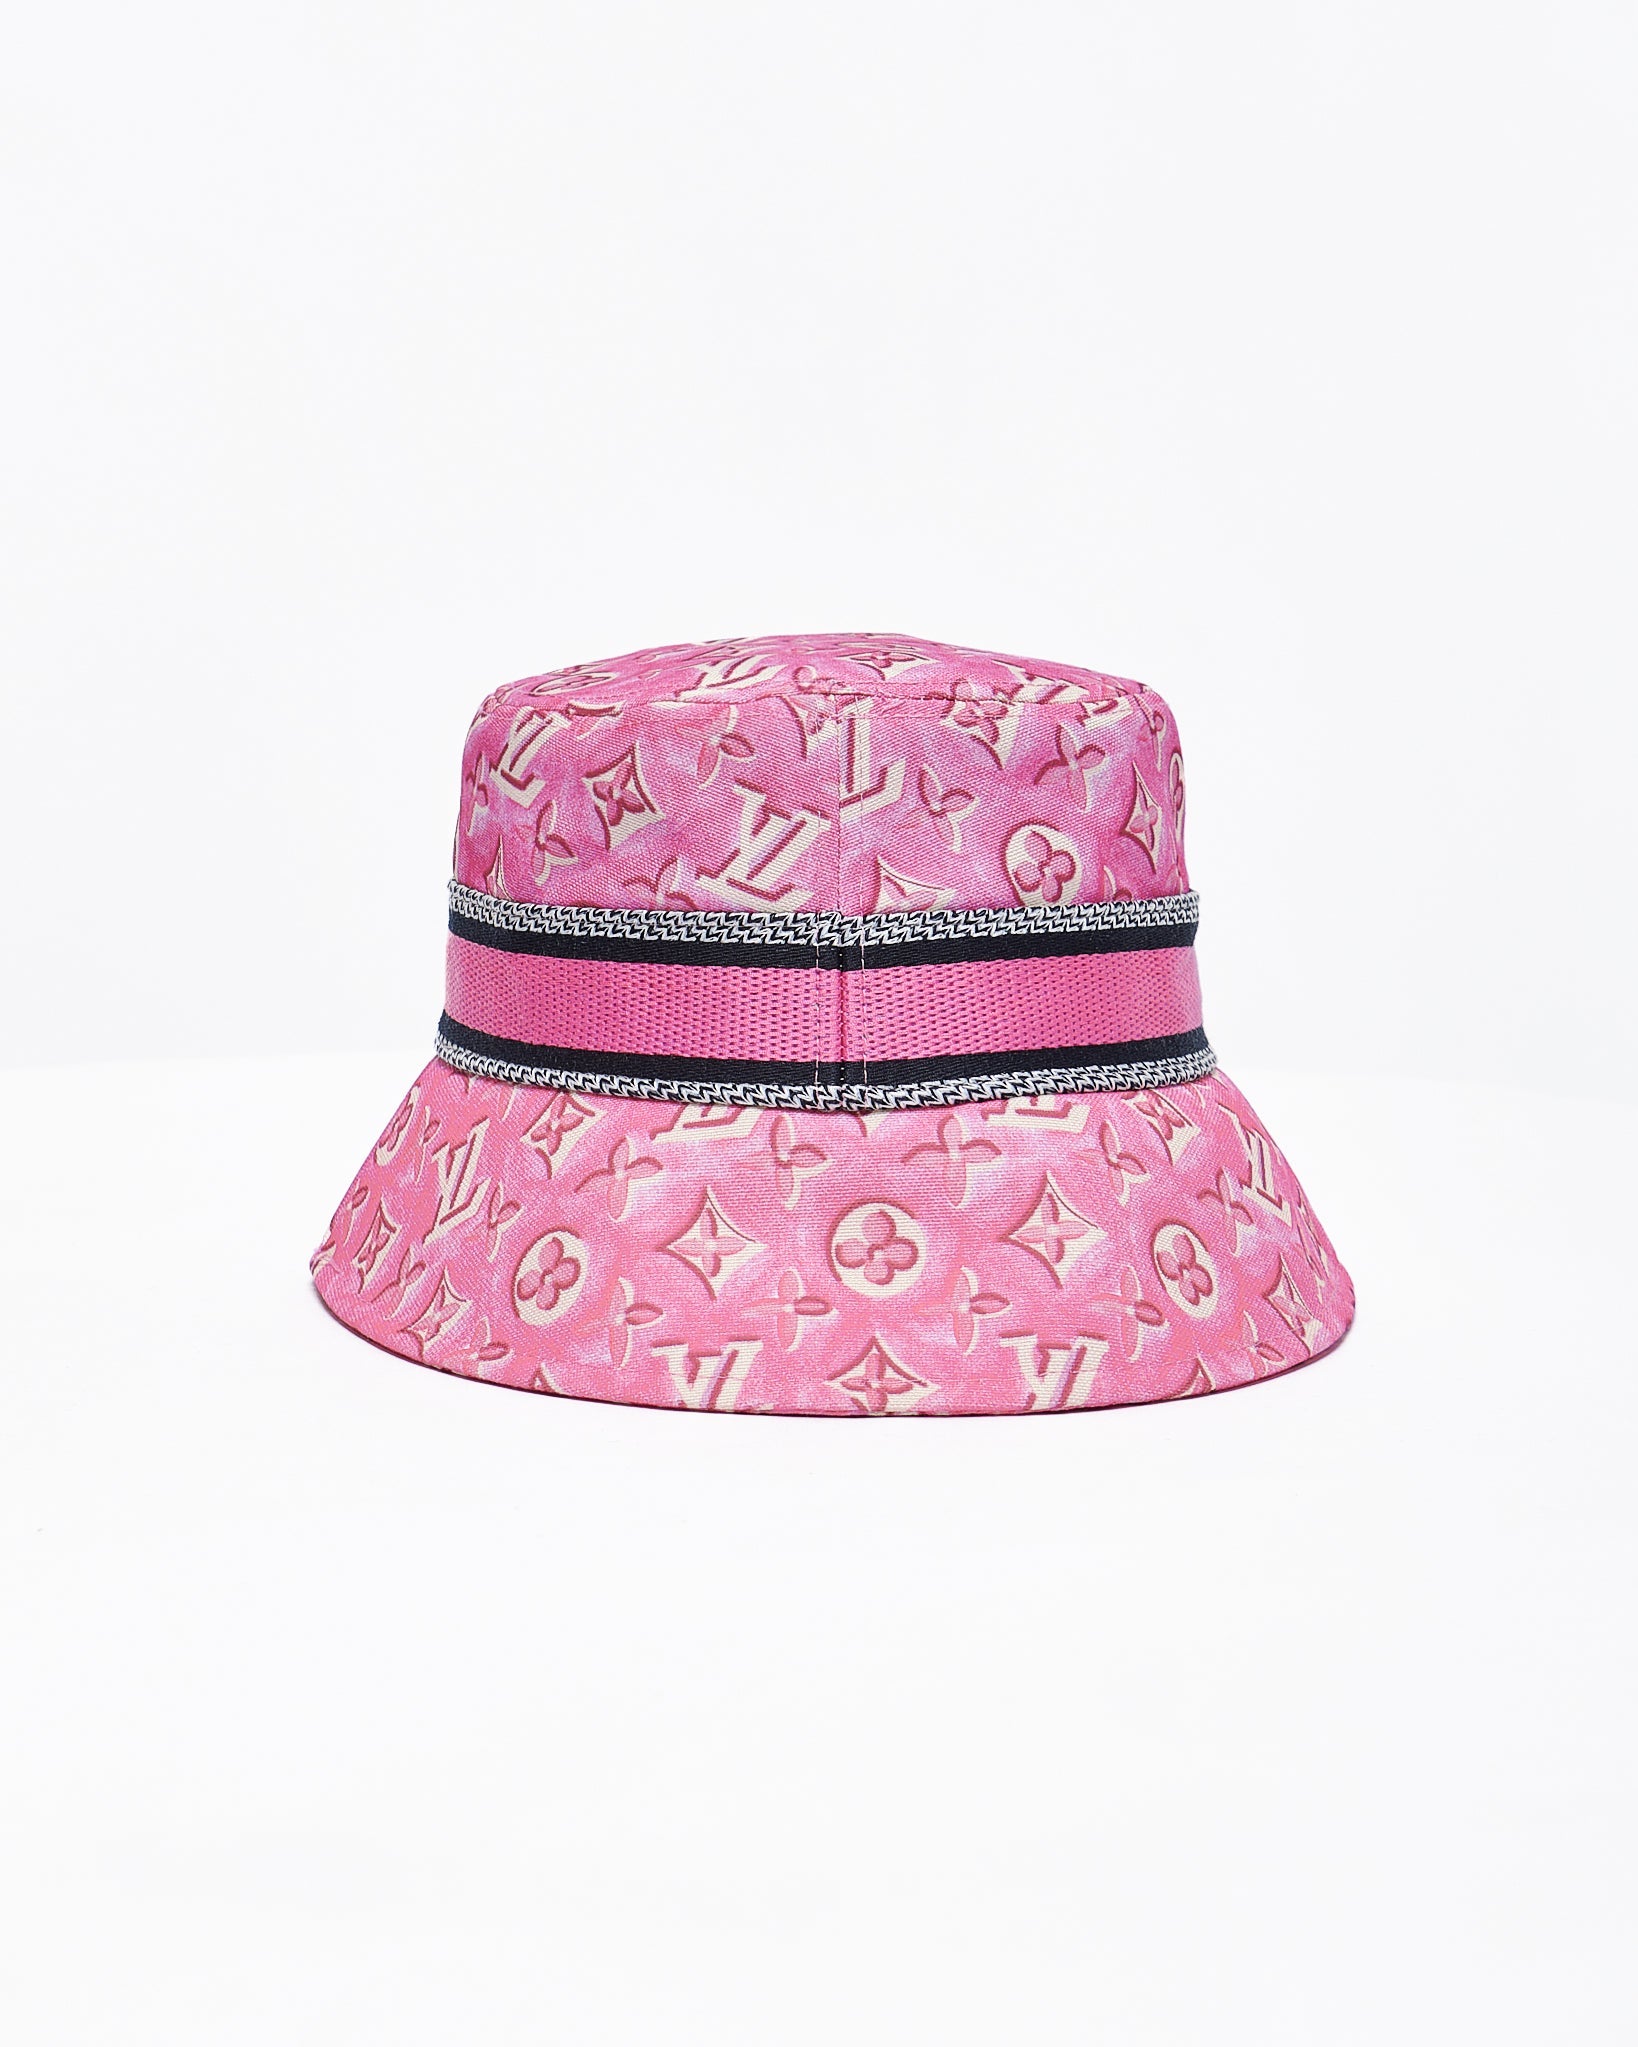 MOI OUTFIT-LV Monogram Over Printed Bucket Hat 14.90